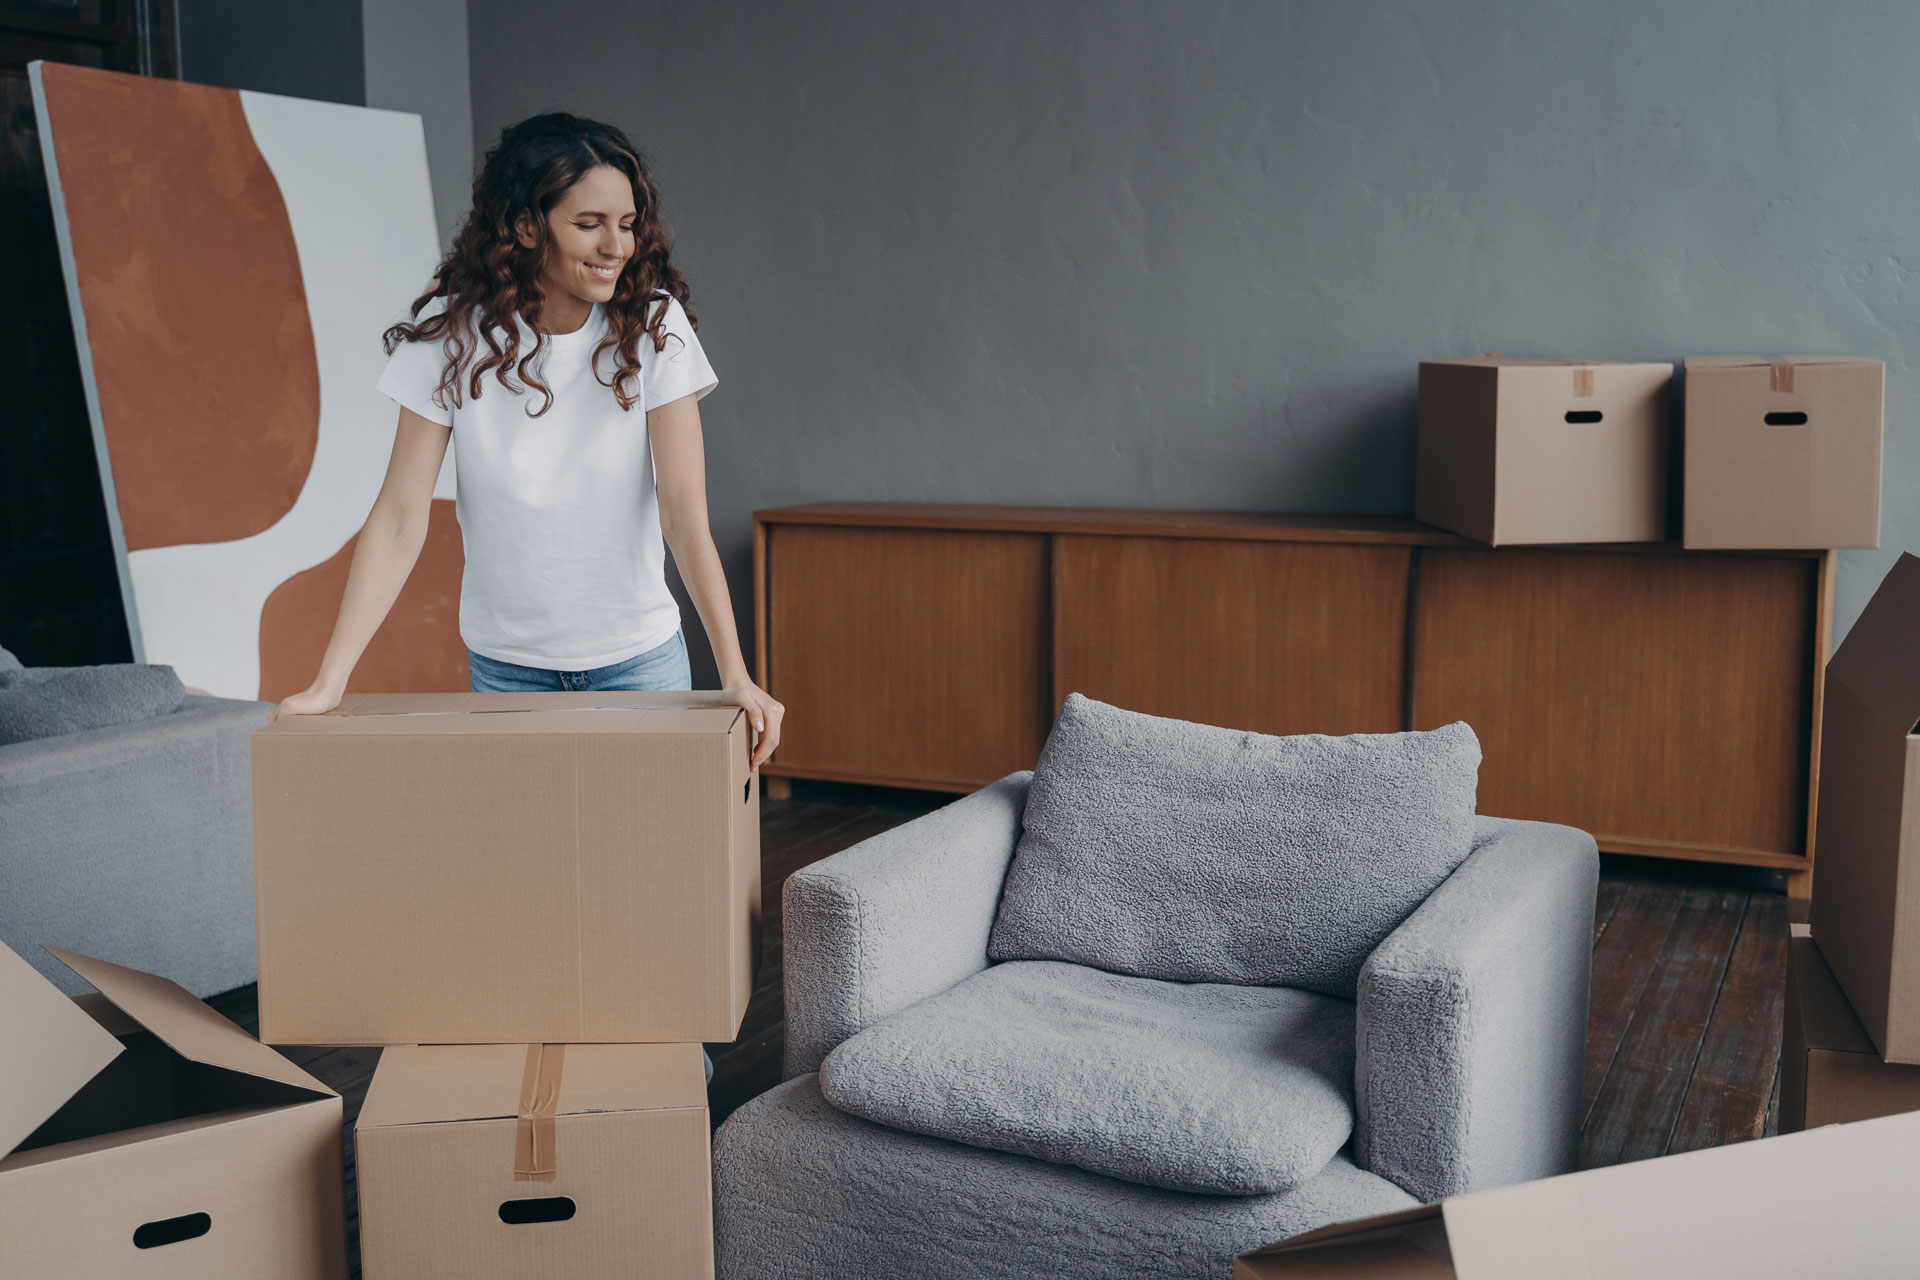 Smiling european woman is packing things. Young lady is unpacking cardboard boxes in new apartment.